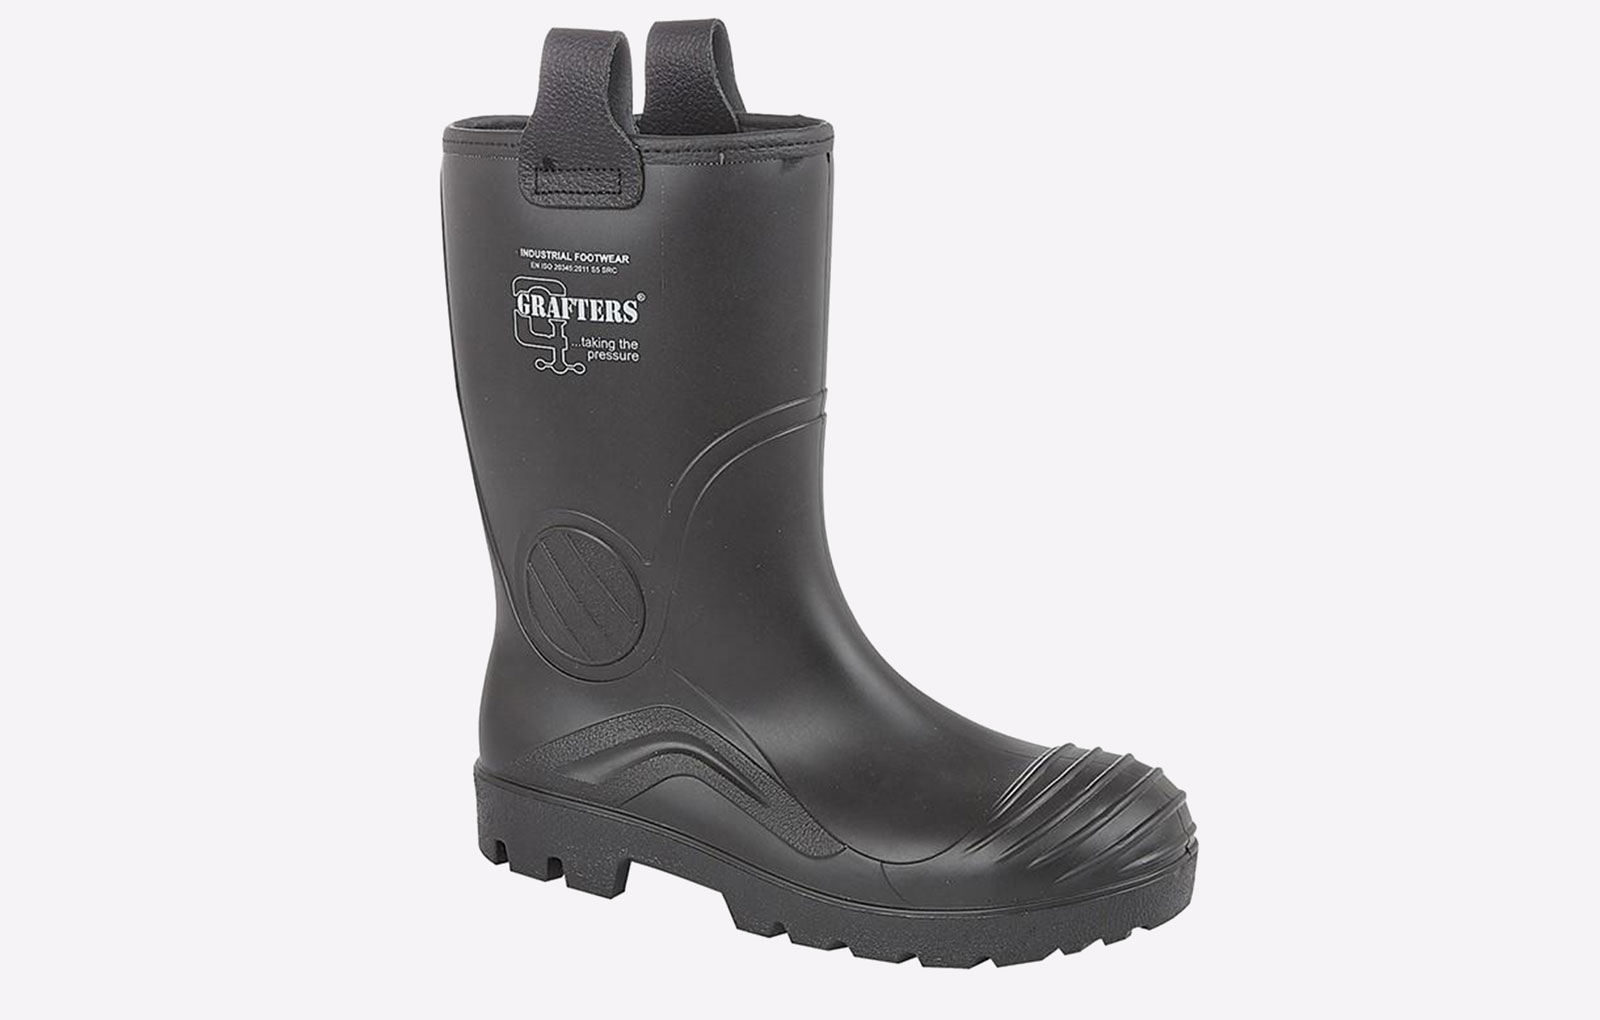 Grafters Antioch Full Safety WATERPROOF Rigger Boot - GBD-1401